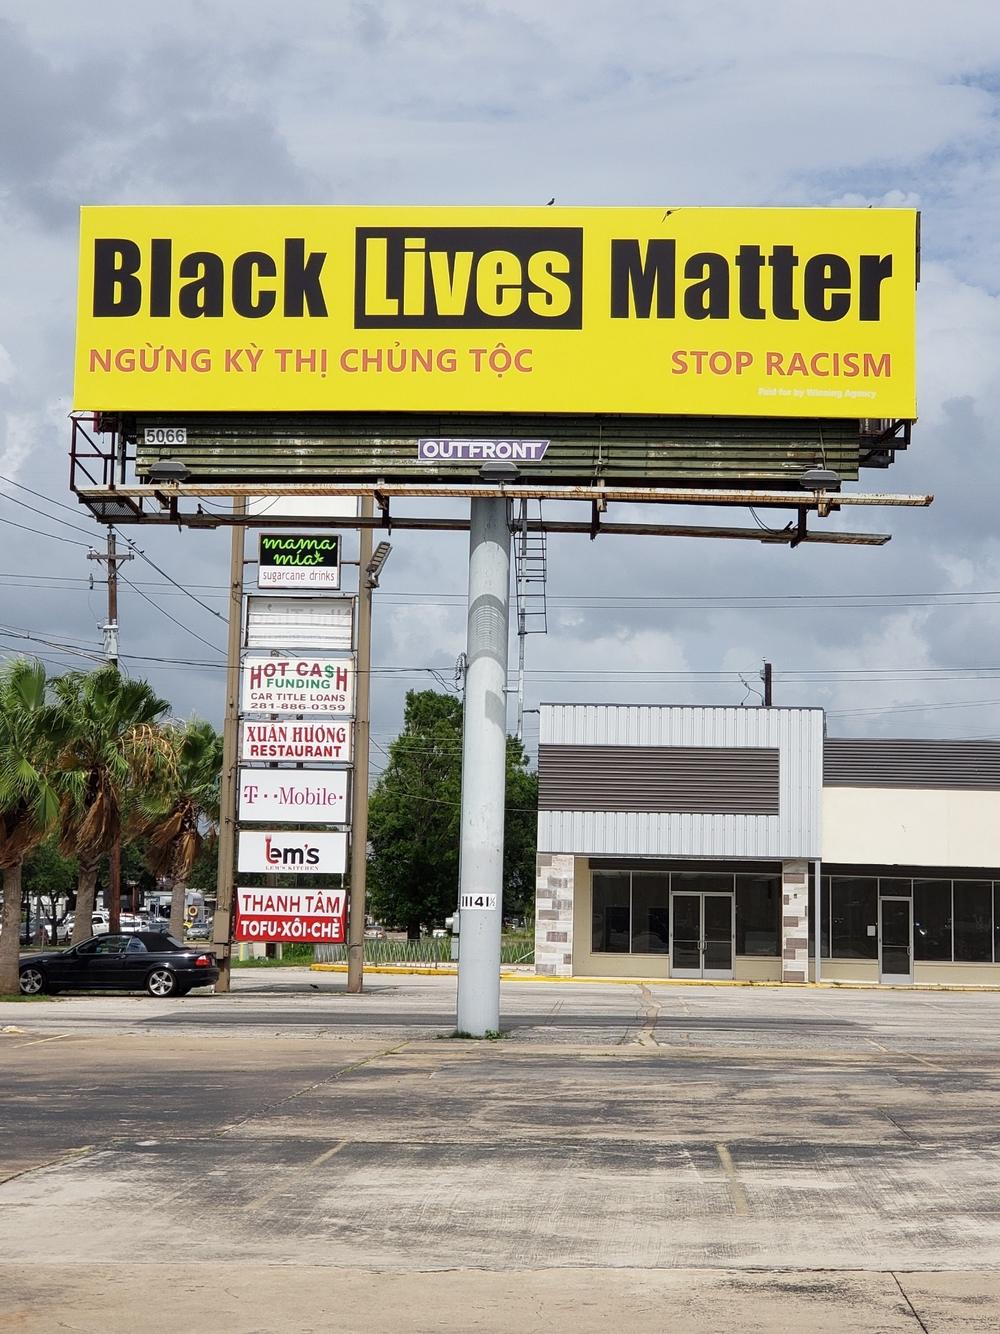 Le Hoang Nguyen received threats after putting up this billboard in Houston after George Floyd was killed.